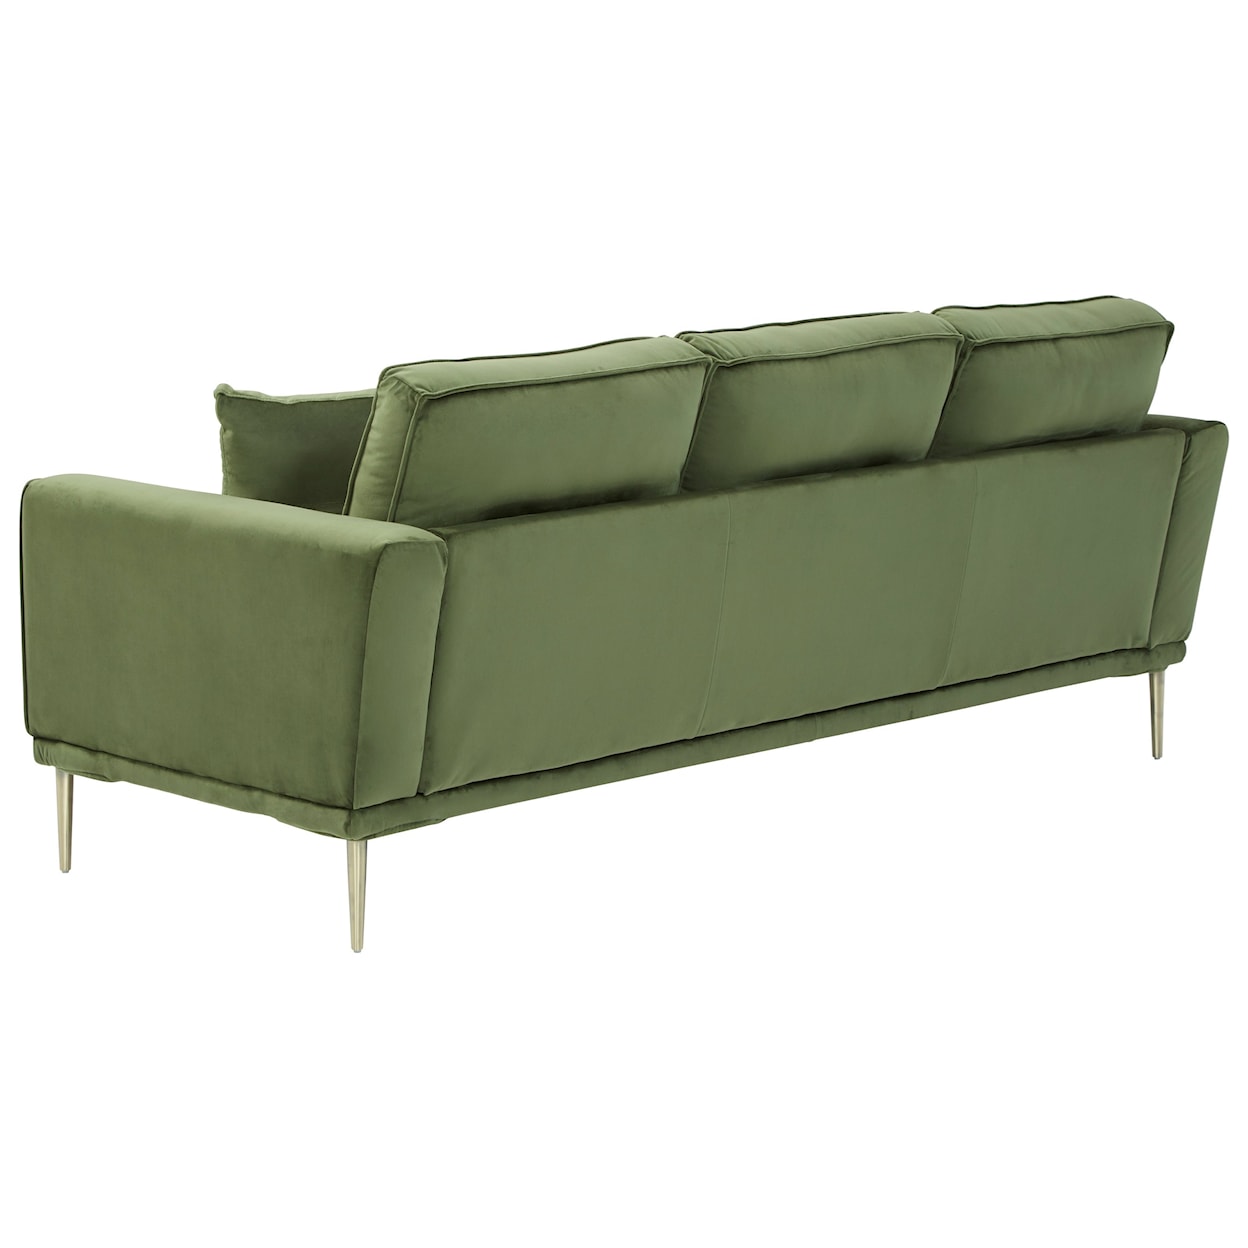 Signature Design by Ashley Macleary Sofa